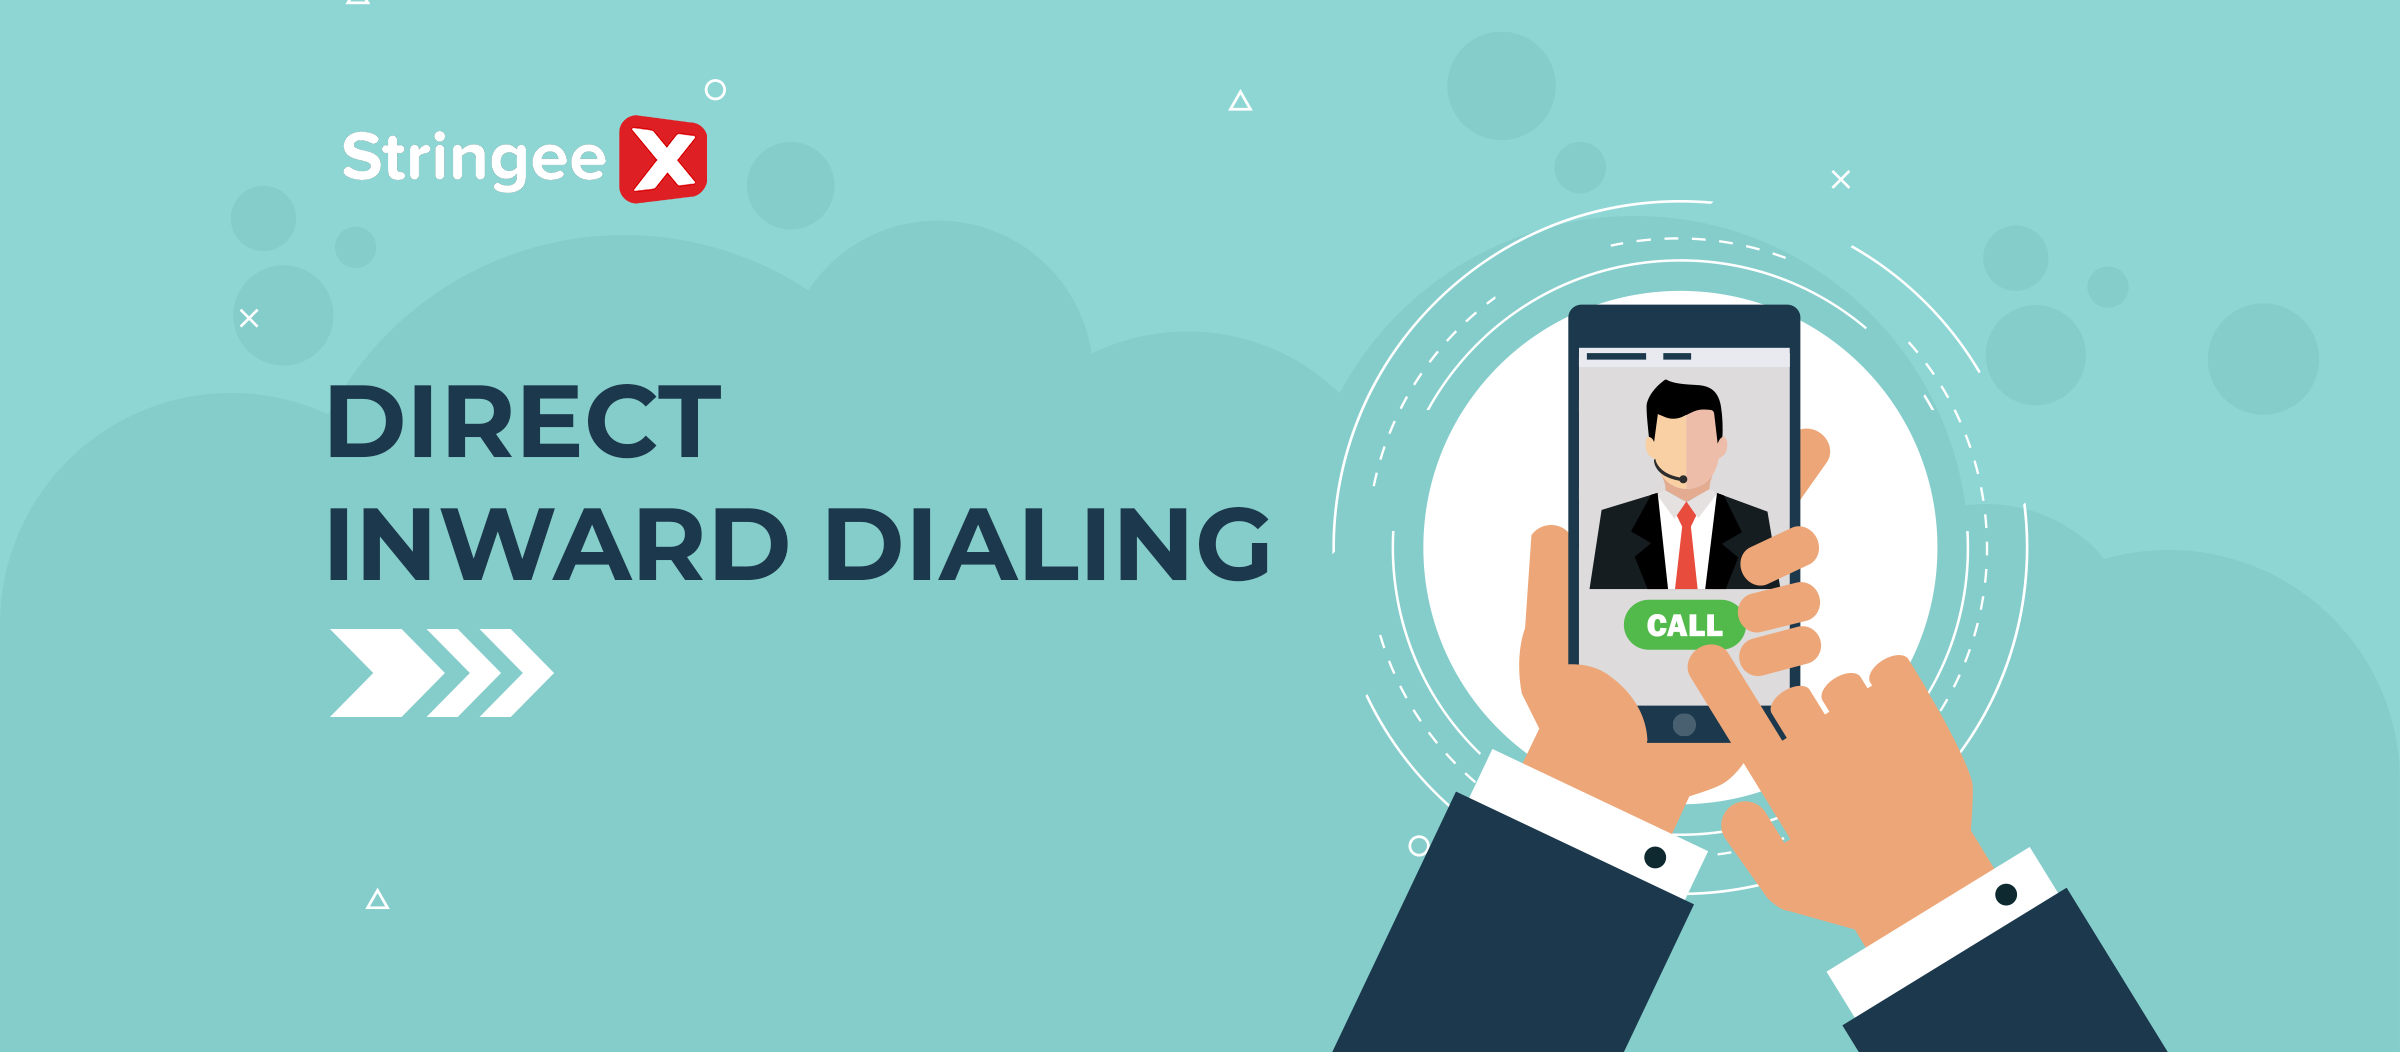 5 Types Of Direct Inward Dialing (DID) & How To Get A DID Number